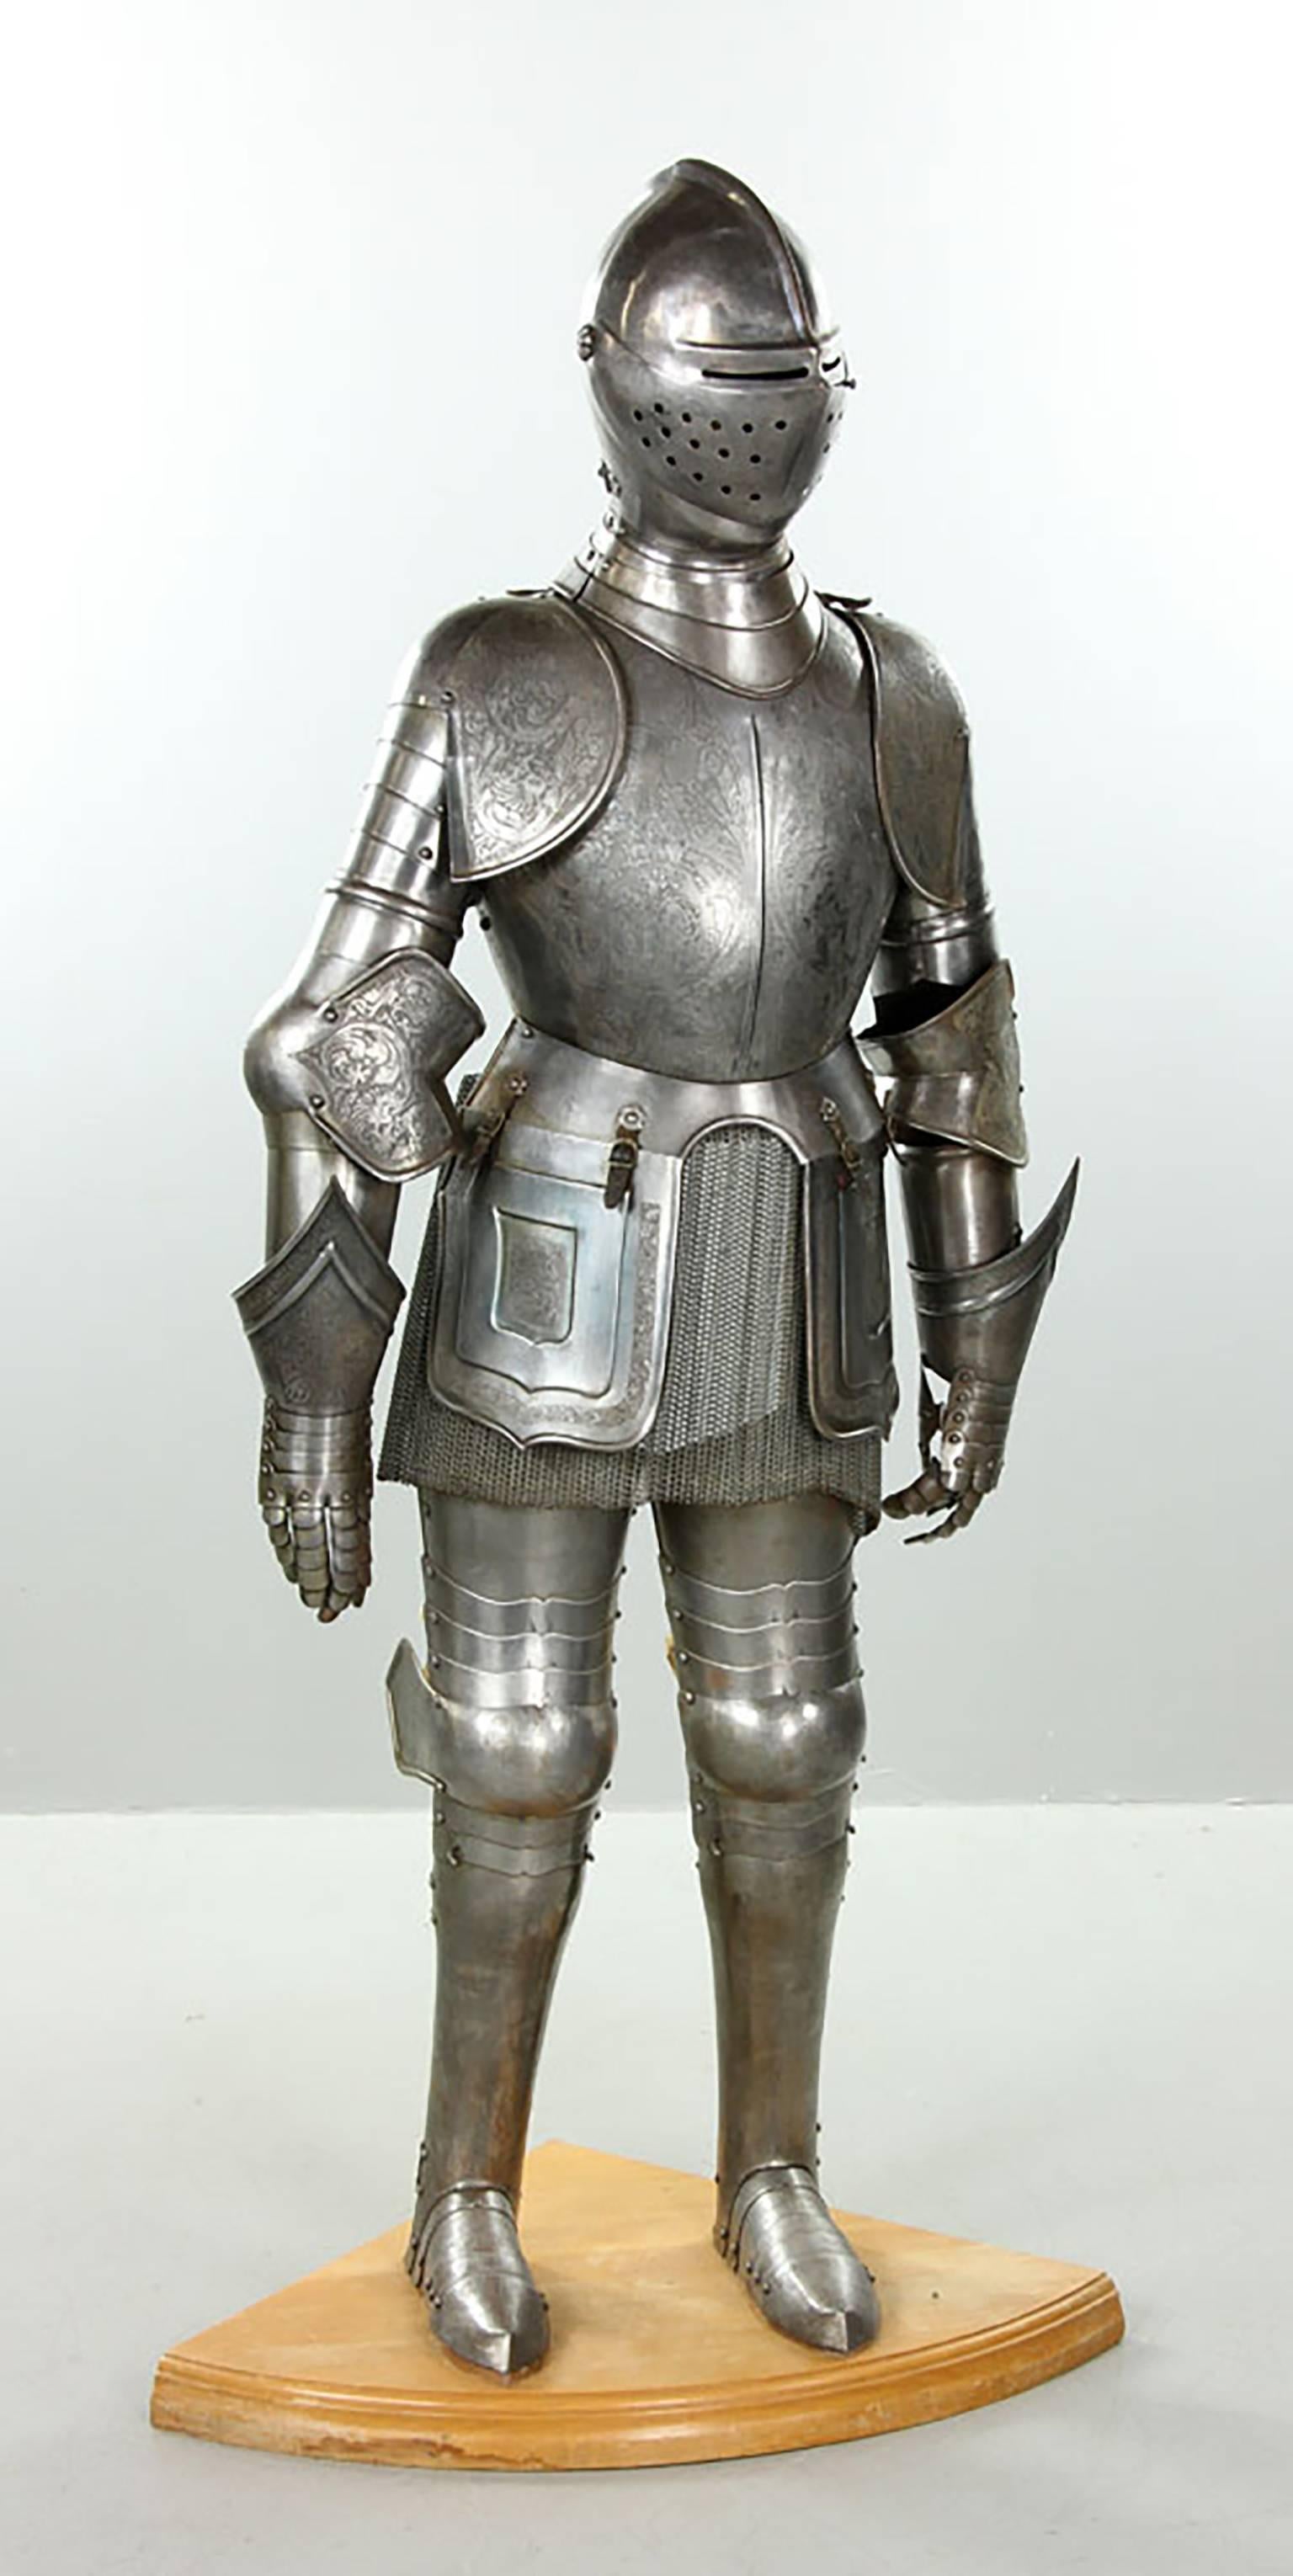 Rare 16th Century Style Life Size Museum Quality Italian Suit of Armor - Art by Unknown